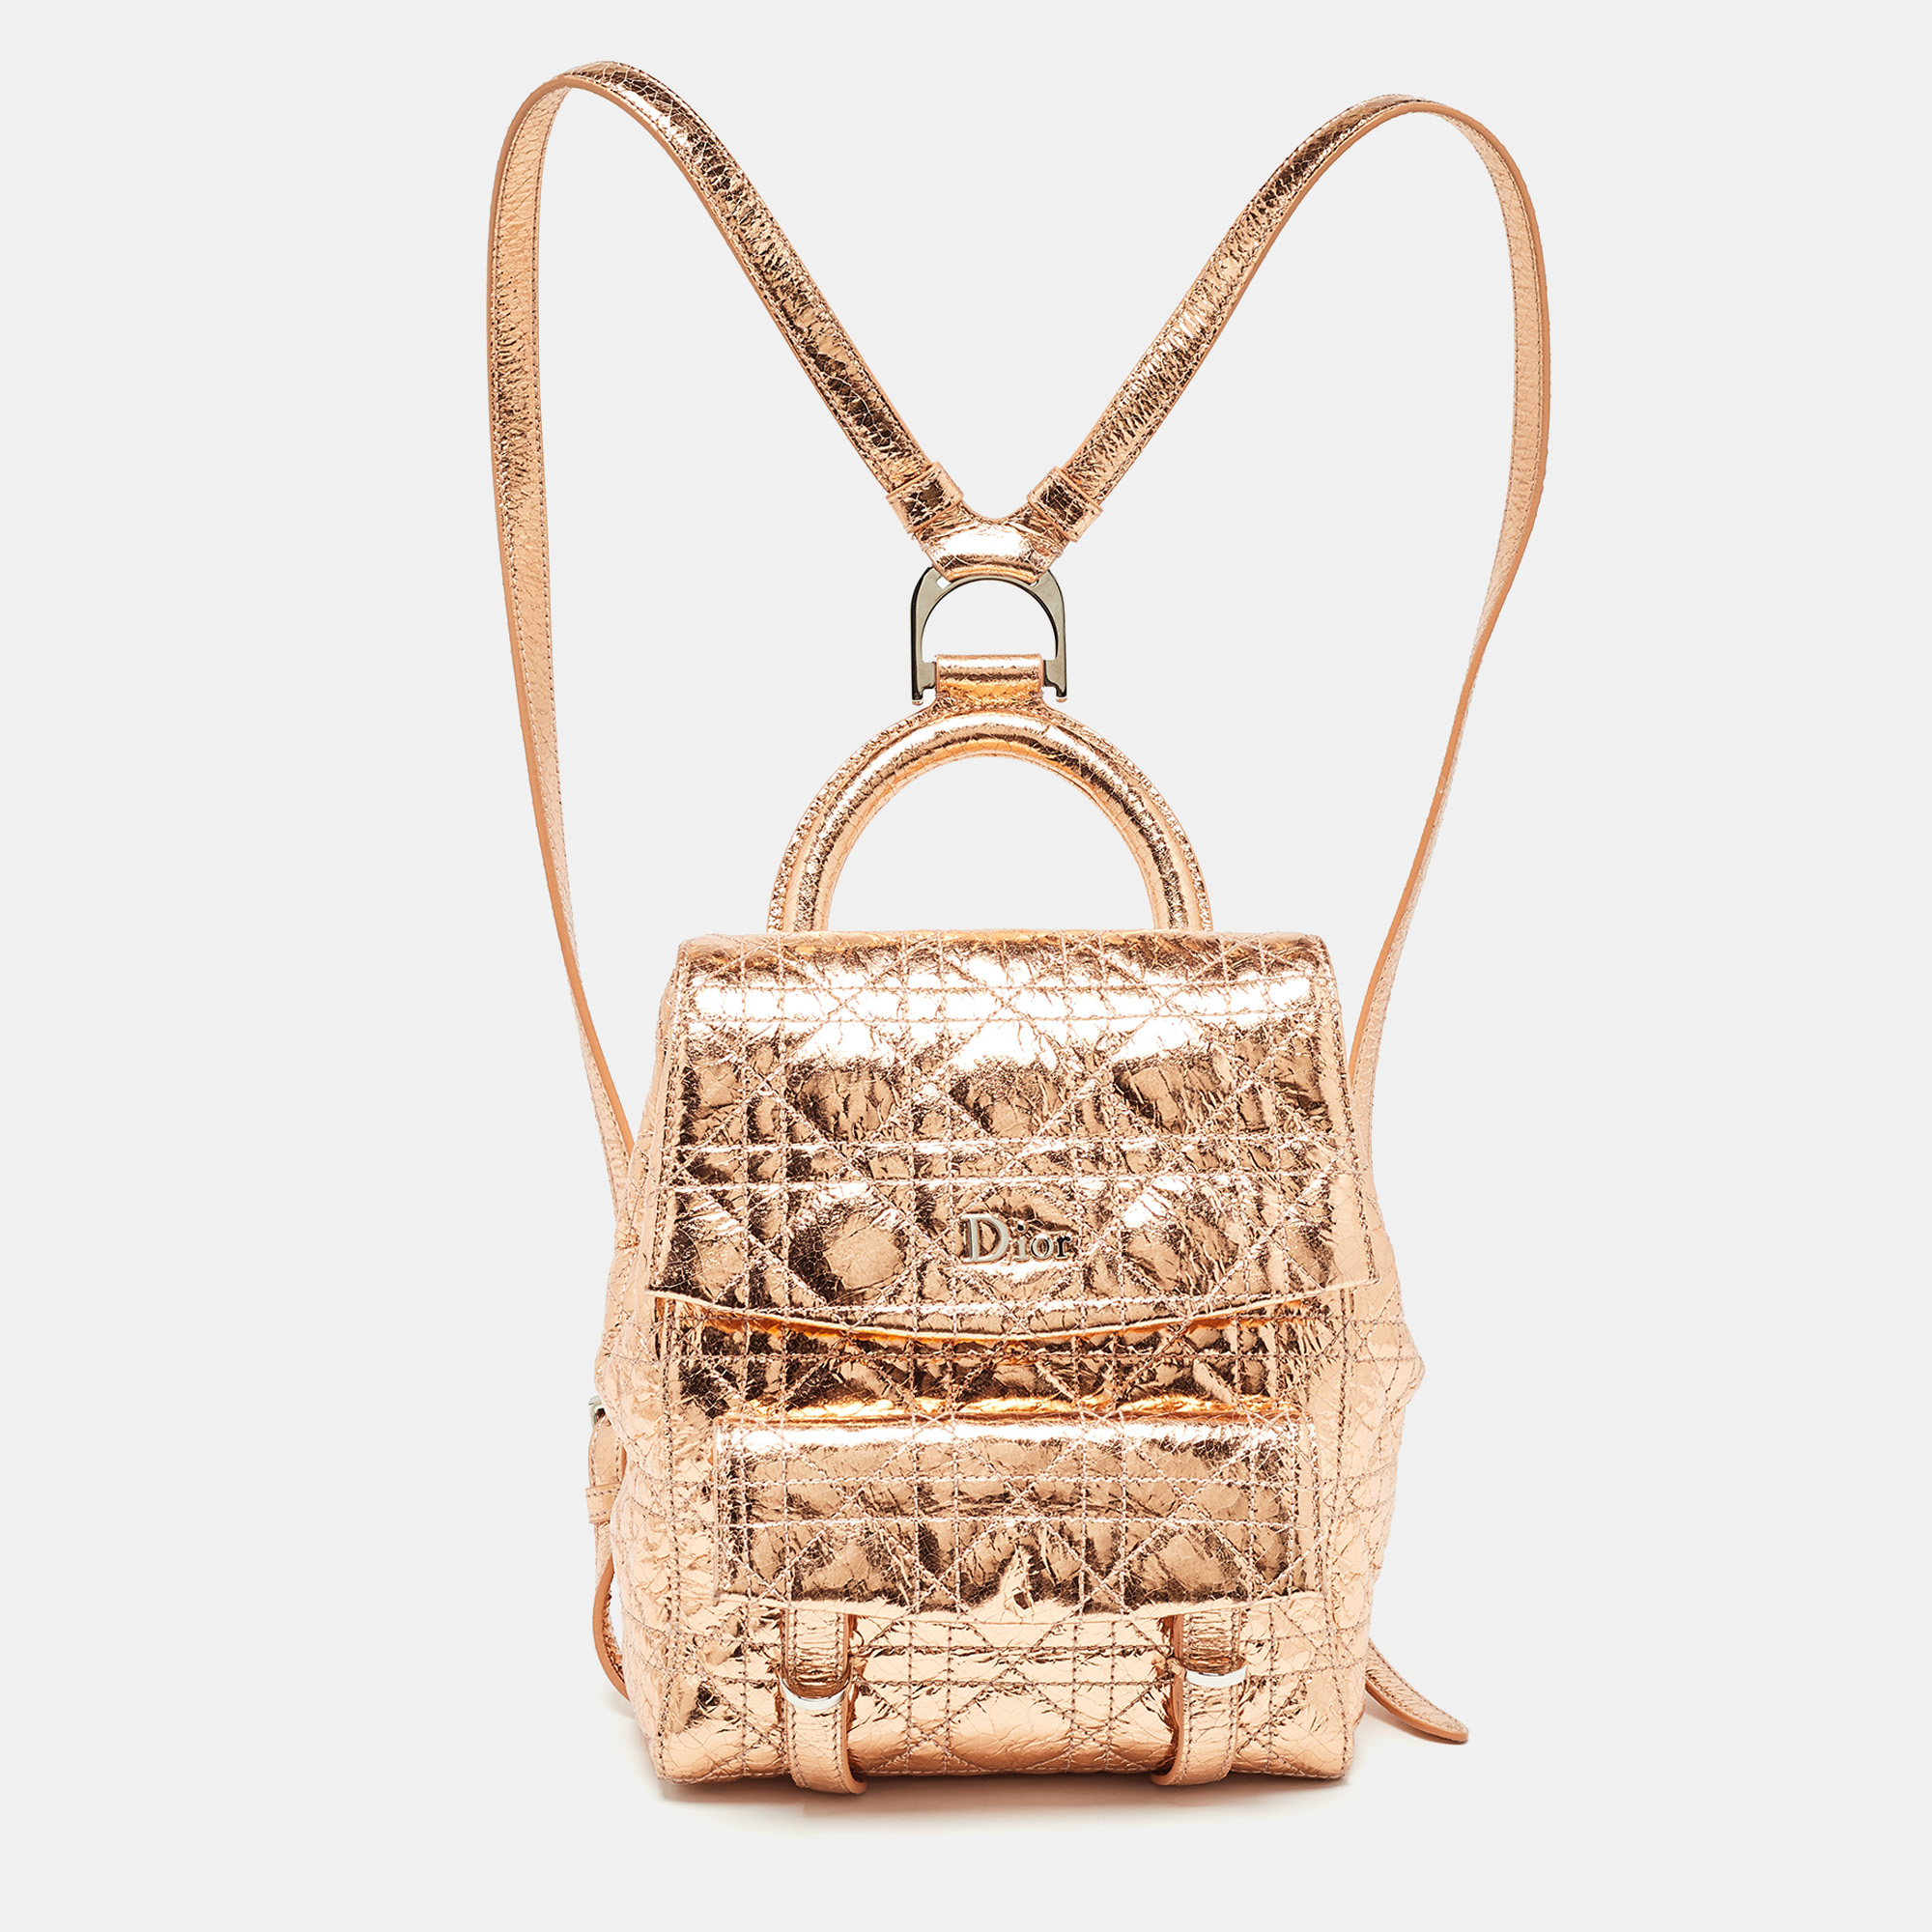 Dior bronze cannage foil leather small stardust backpack